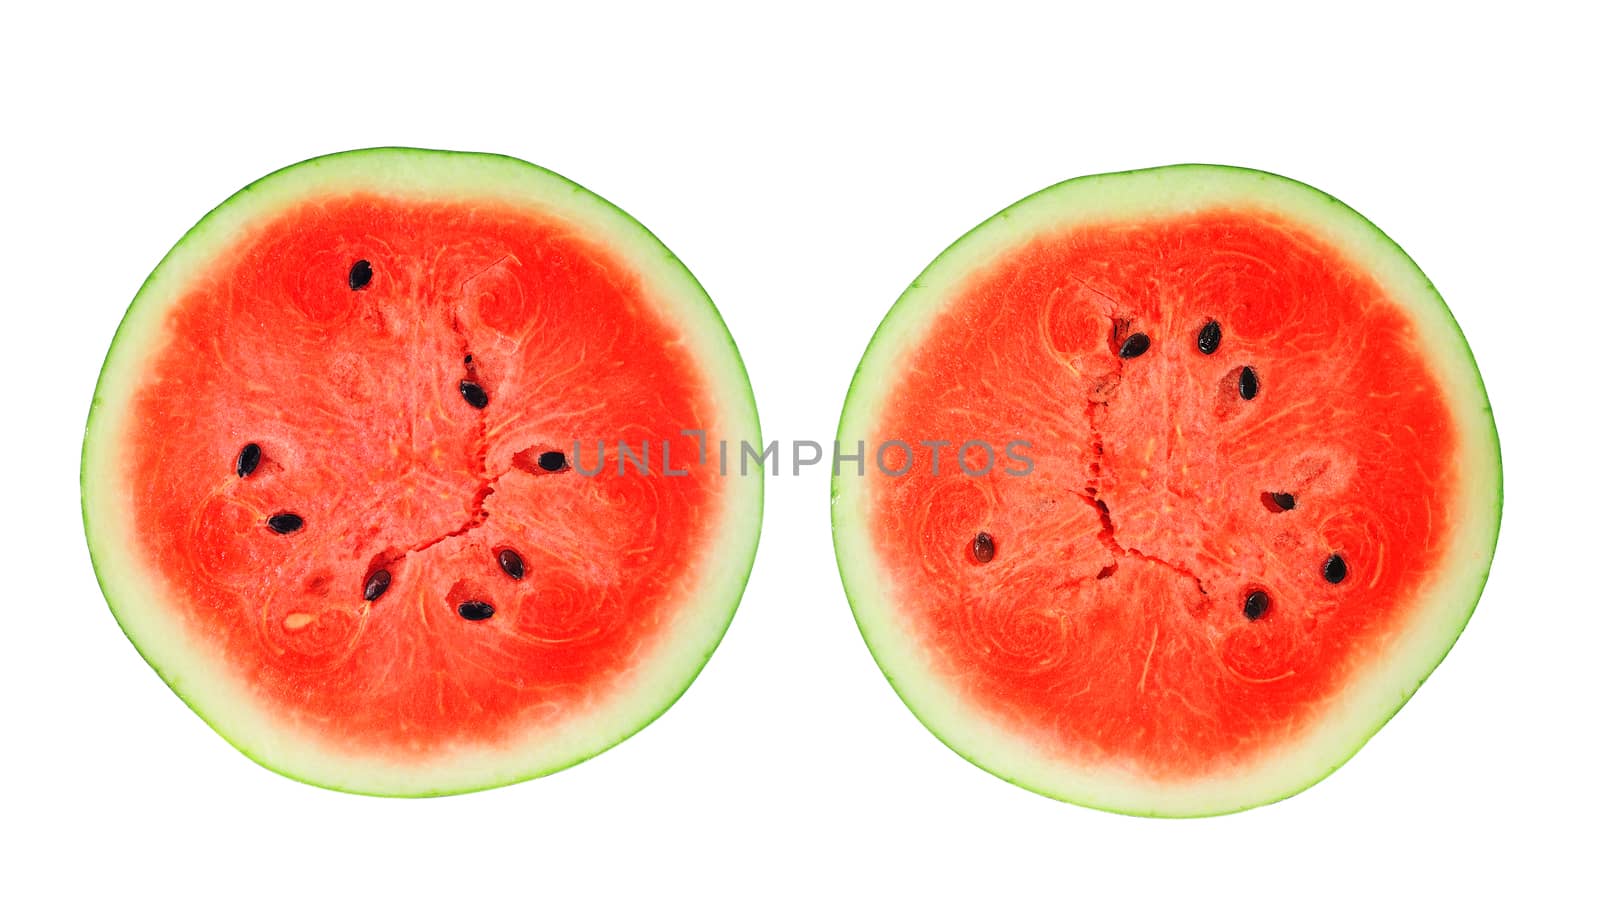 water melon isolated on white background by sommai